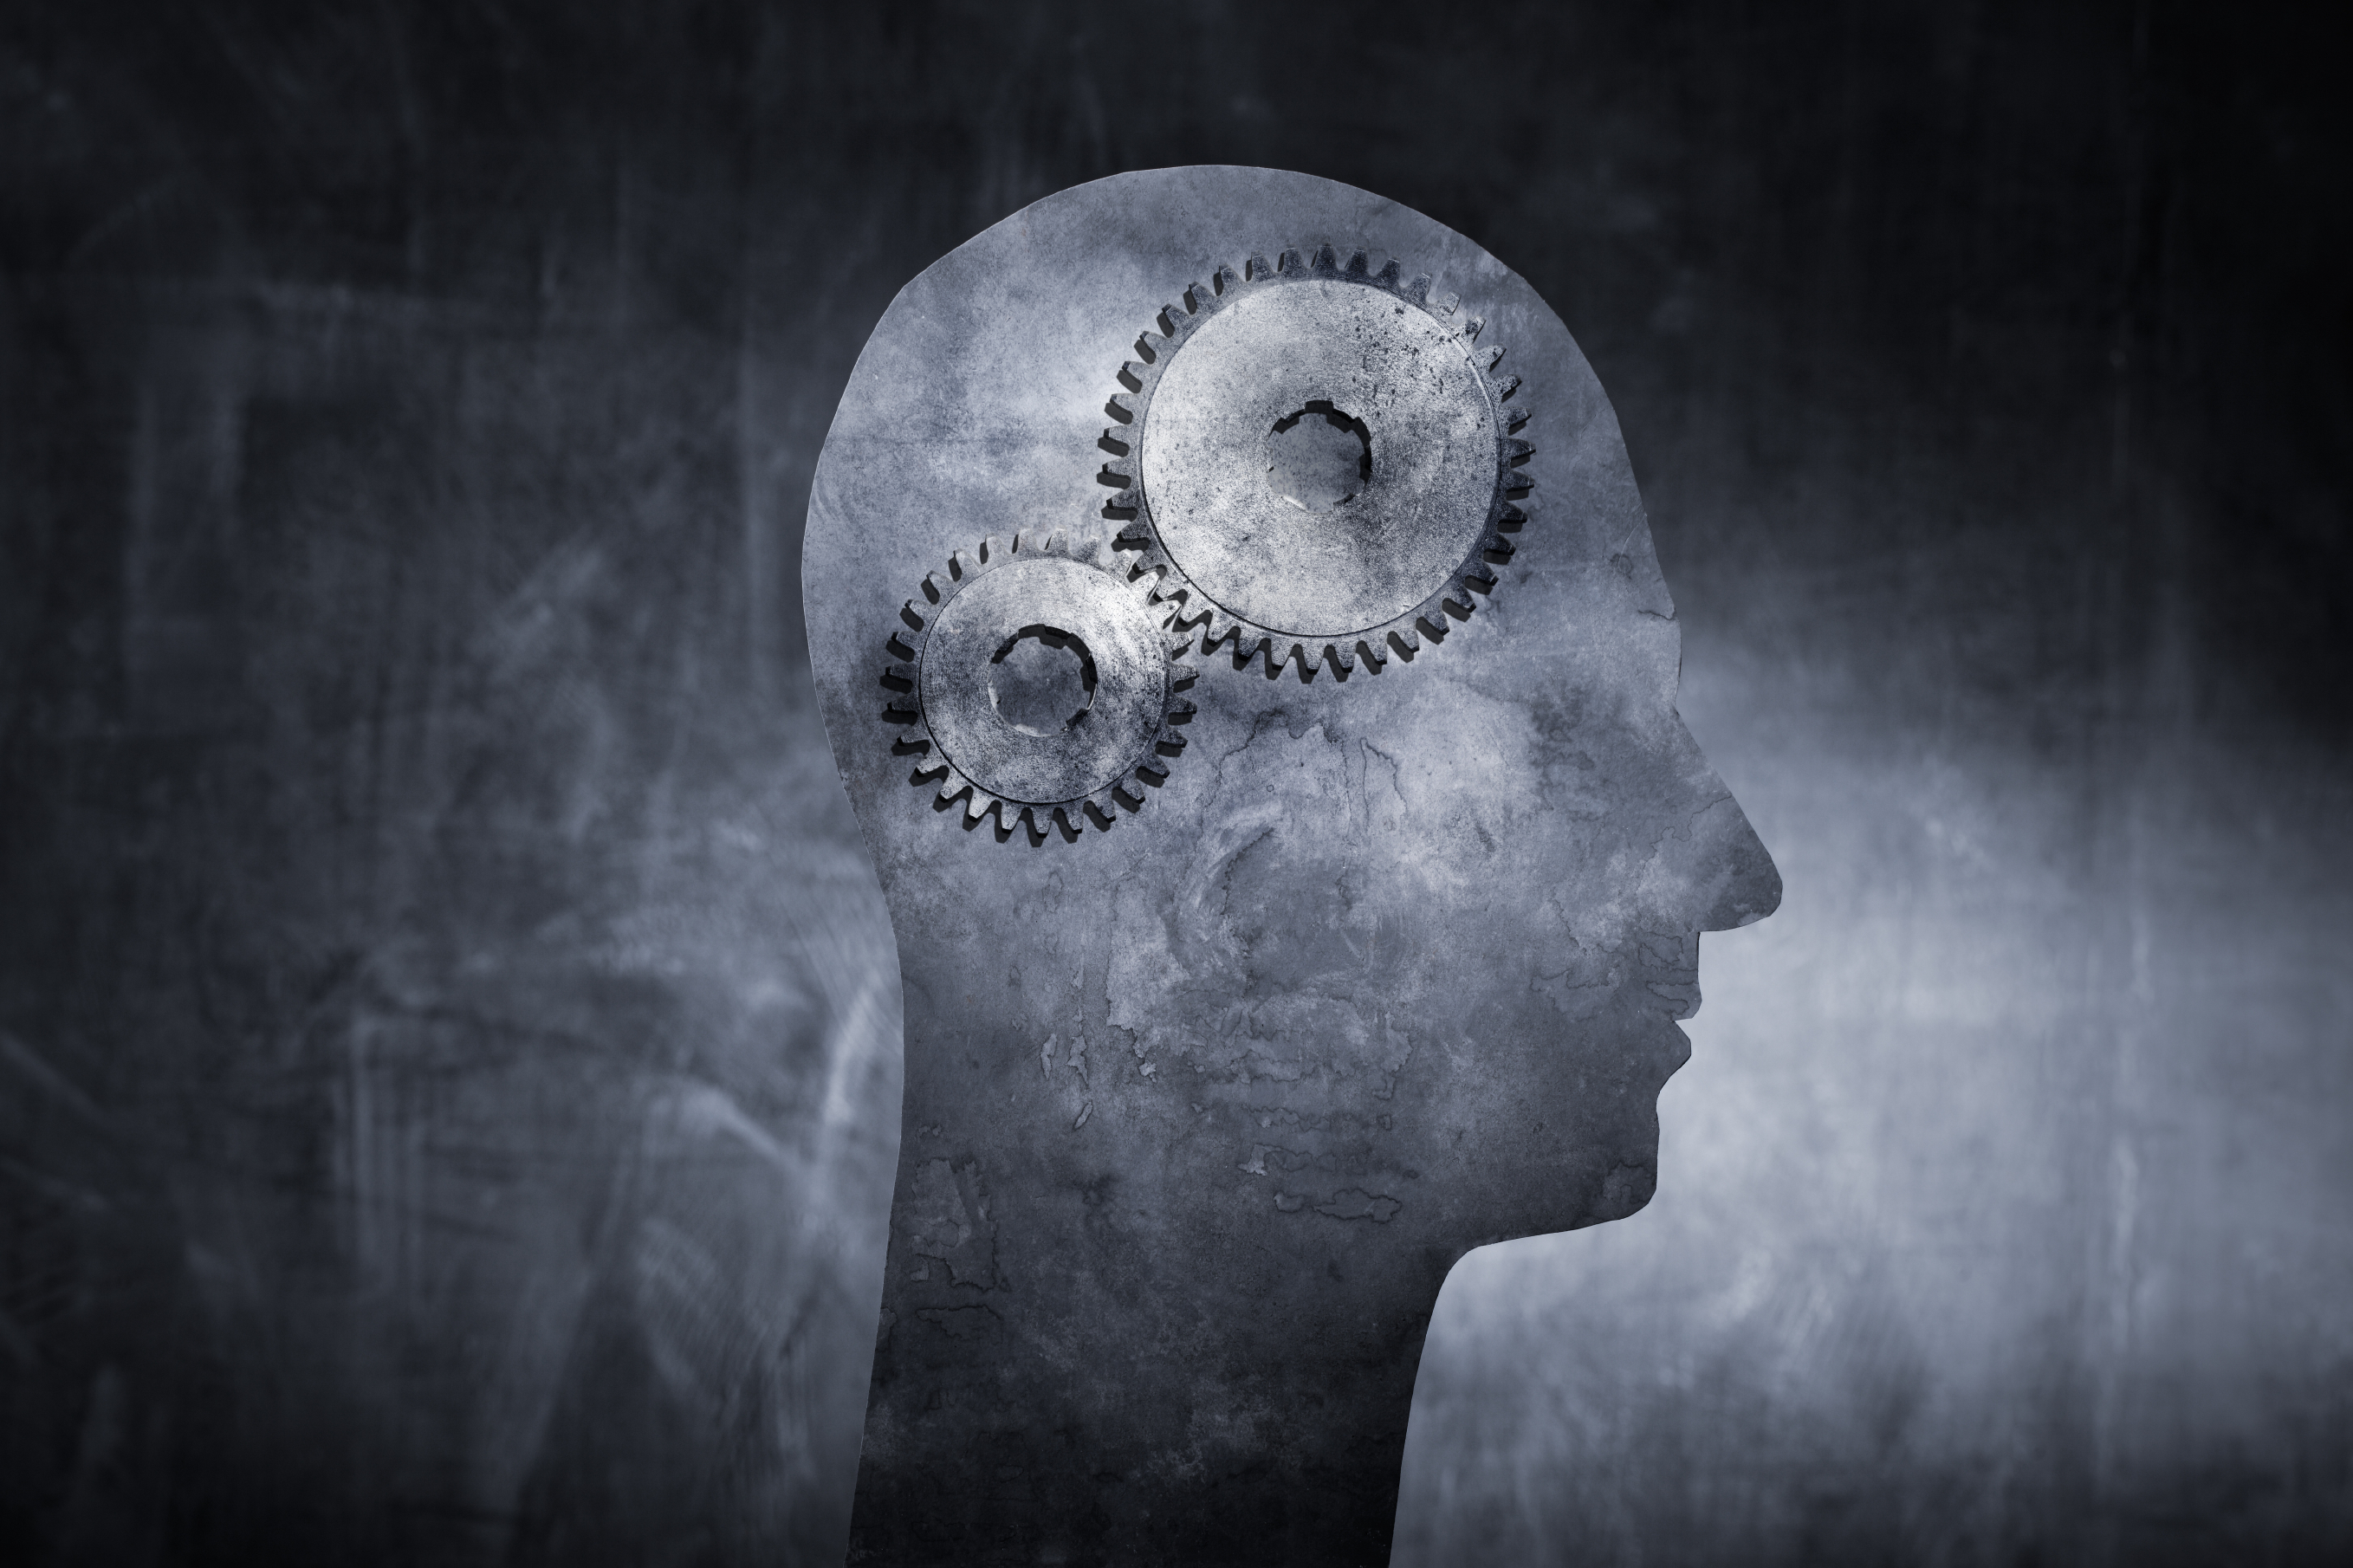 Conceptual image of a head with cog gears as brain.